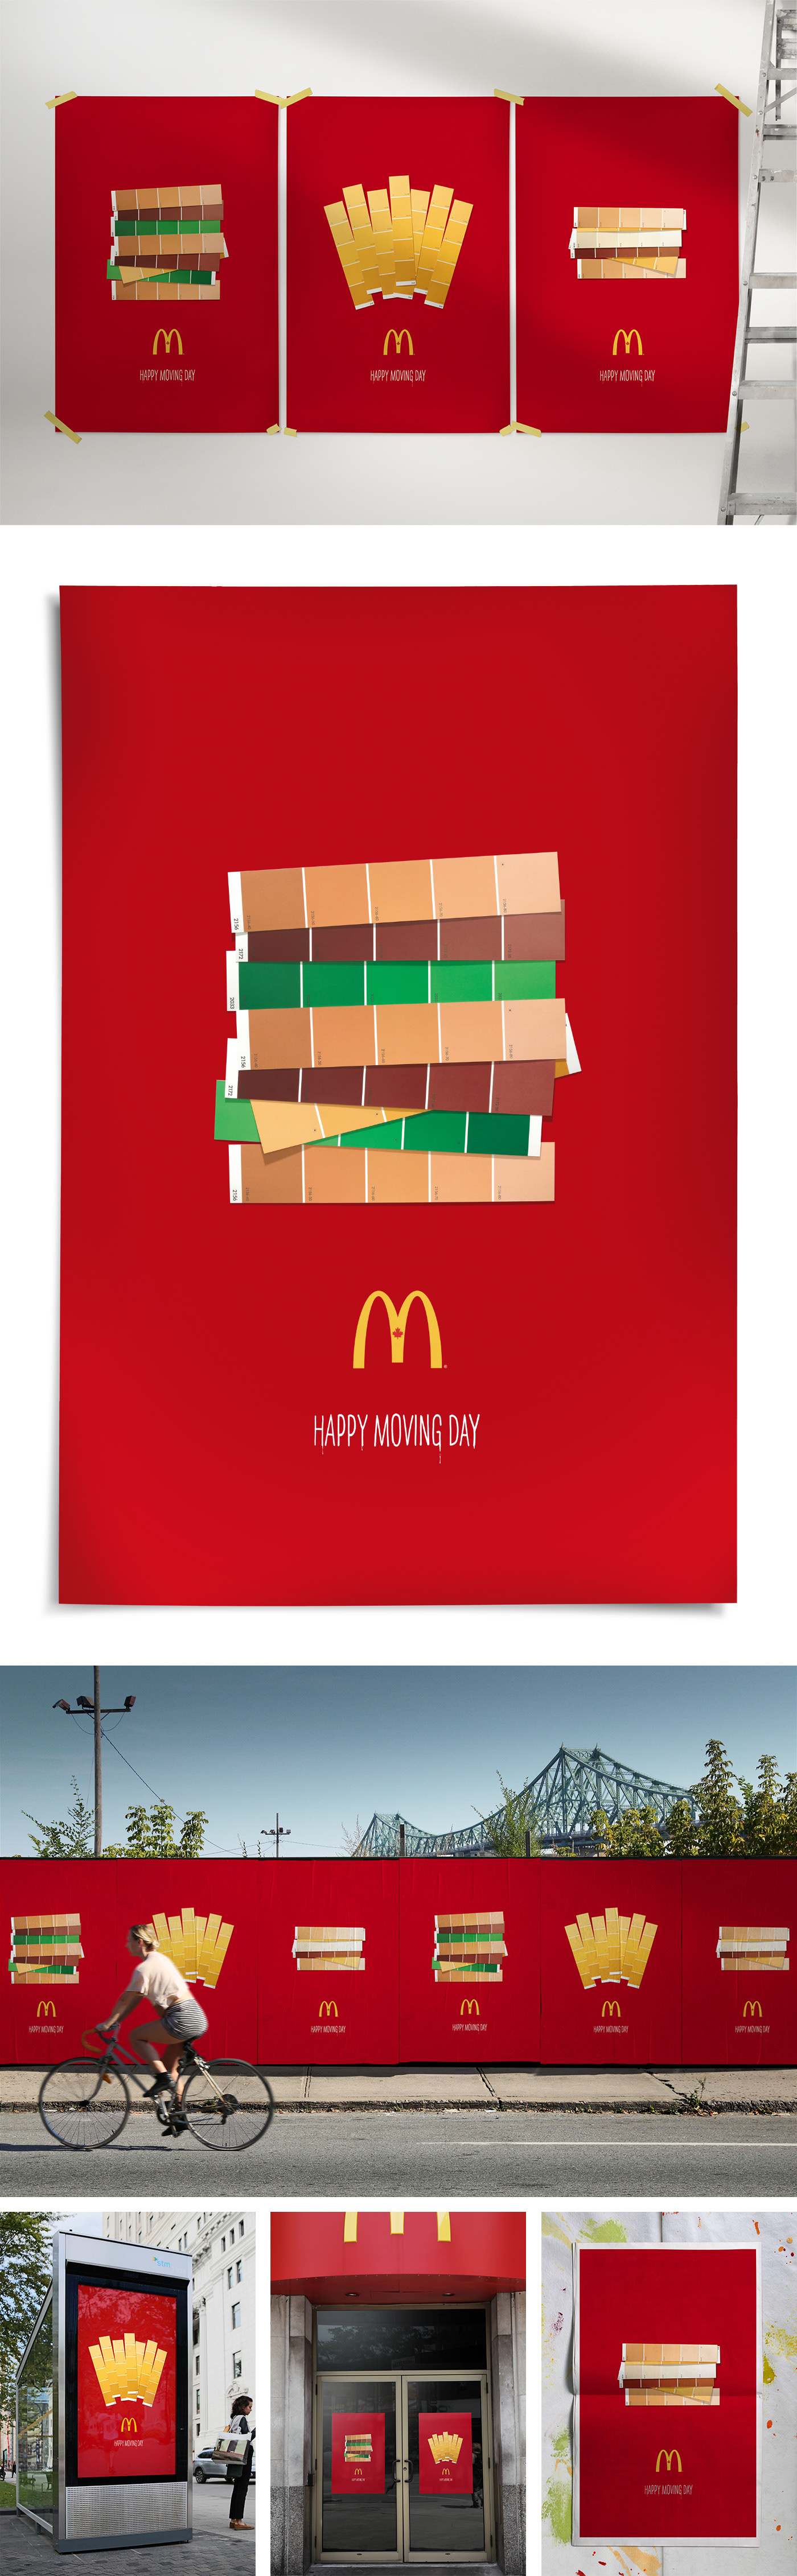 Advertising  mcdonald's moving day  ILLUSTRATION  Luzer's archive Archive